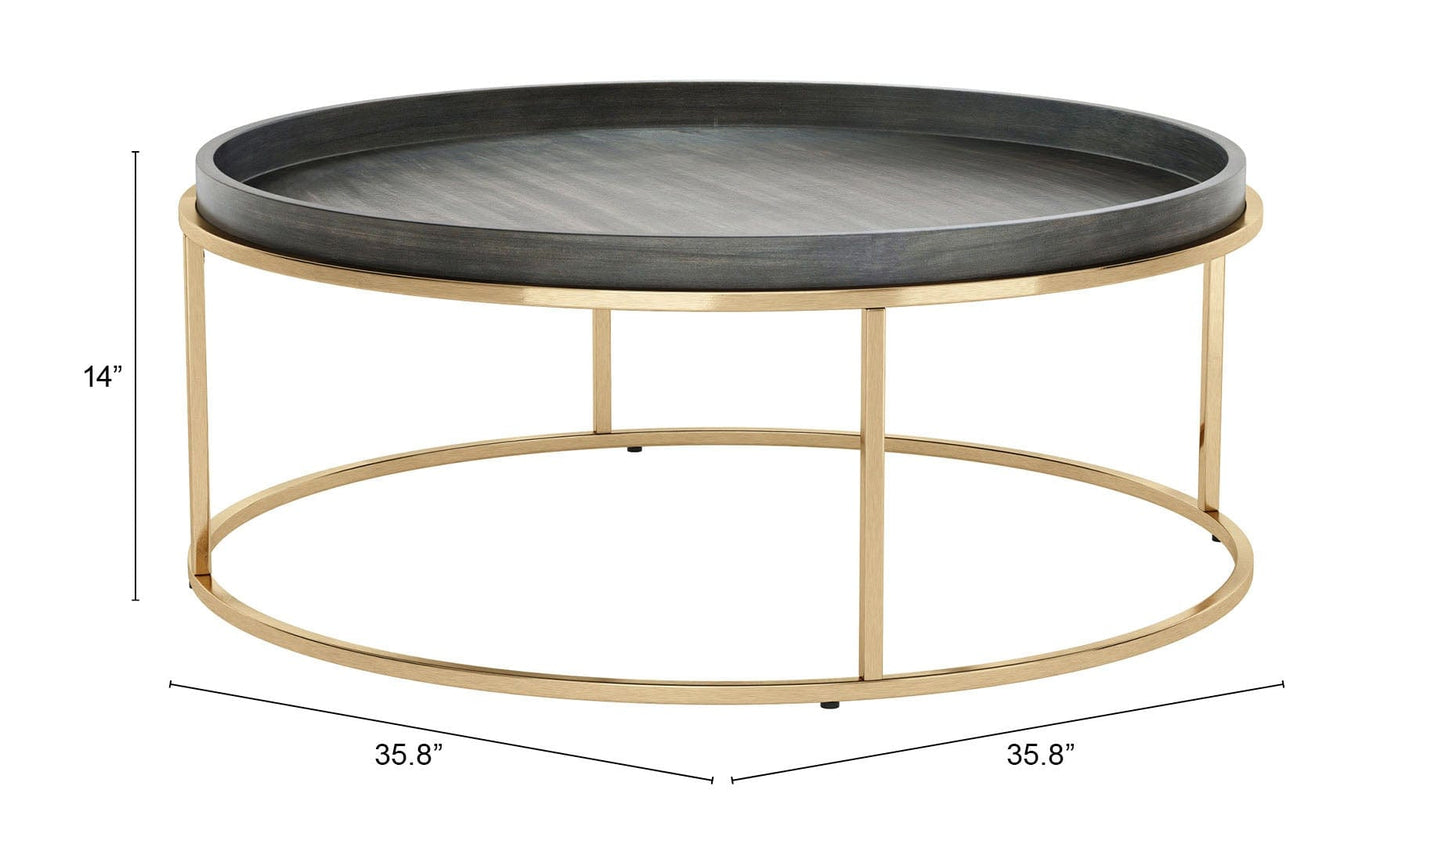 Measurements of Jahre coffee table